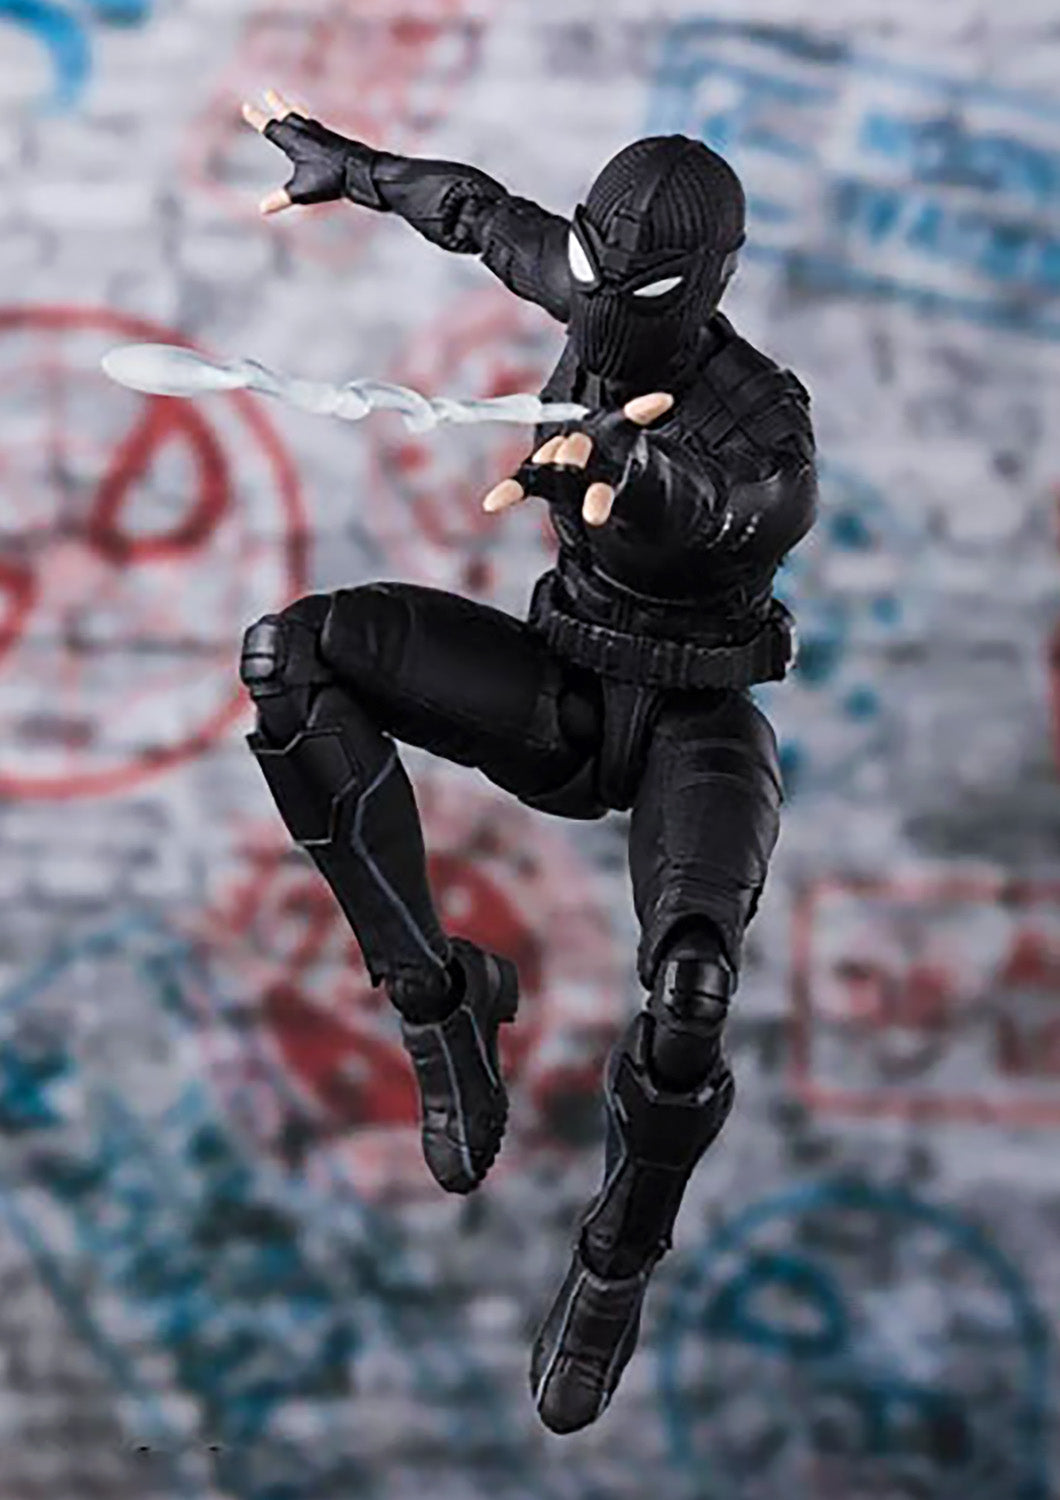 SH FIGUARTS SPIDERMAN FAR FROM HOME SPIDERMAN STEALTH SUIT - 57885 - Anotoys Collectibles